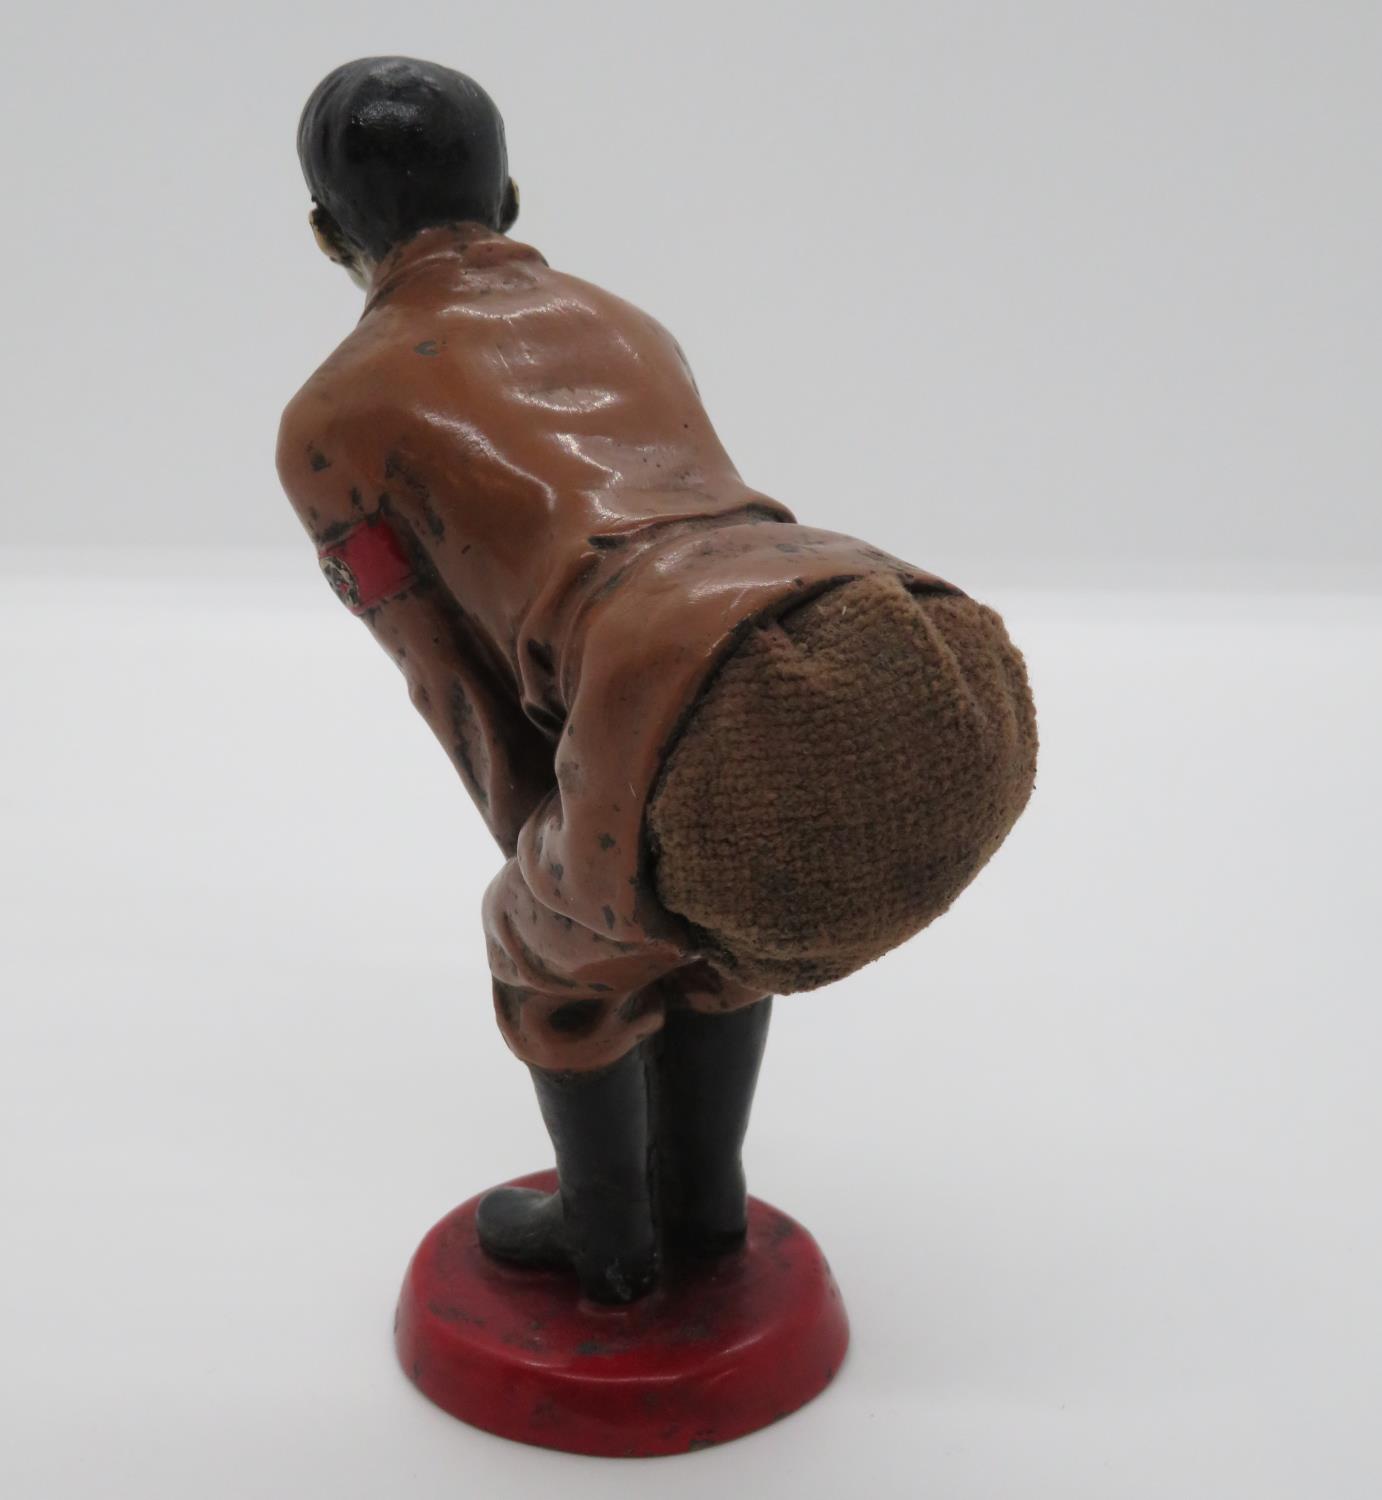 Cold cast bronze Adolf Hitler pin cushion 5" high - Image 2 of 7